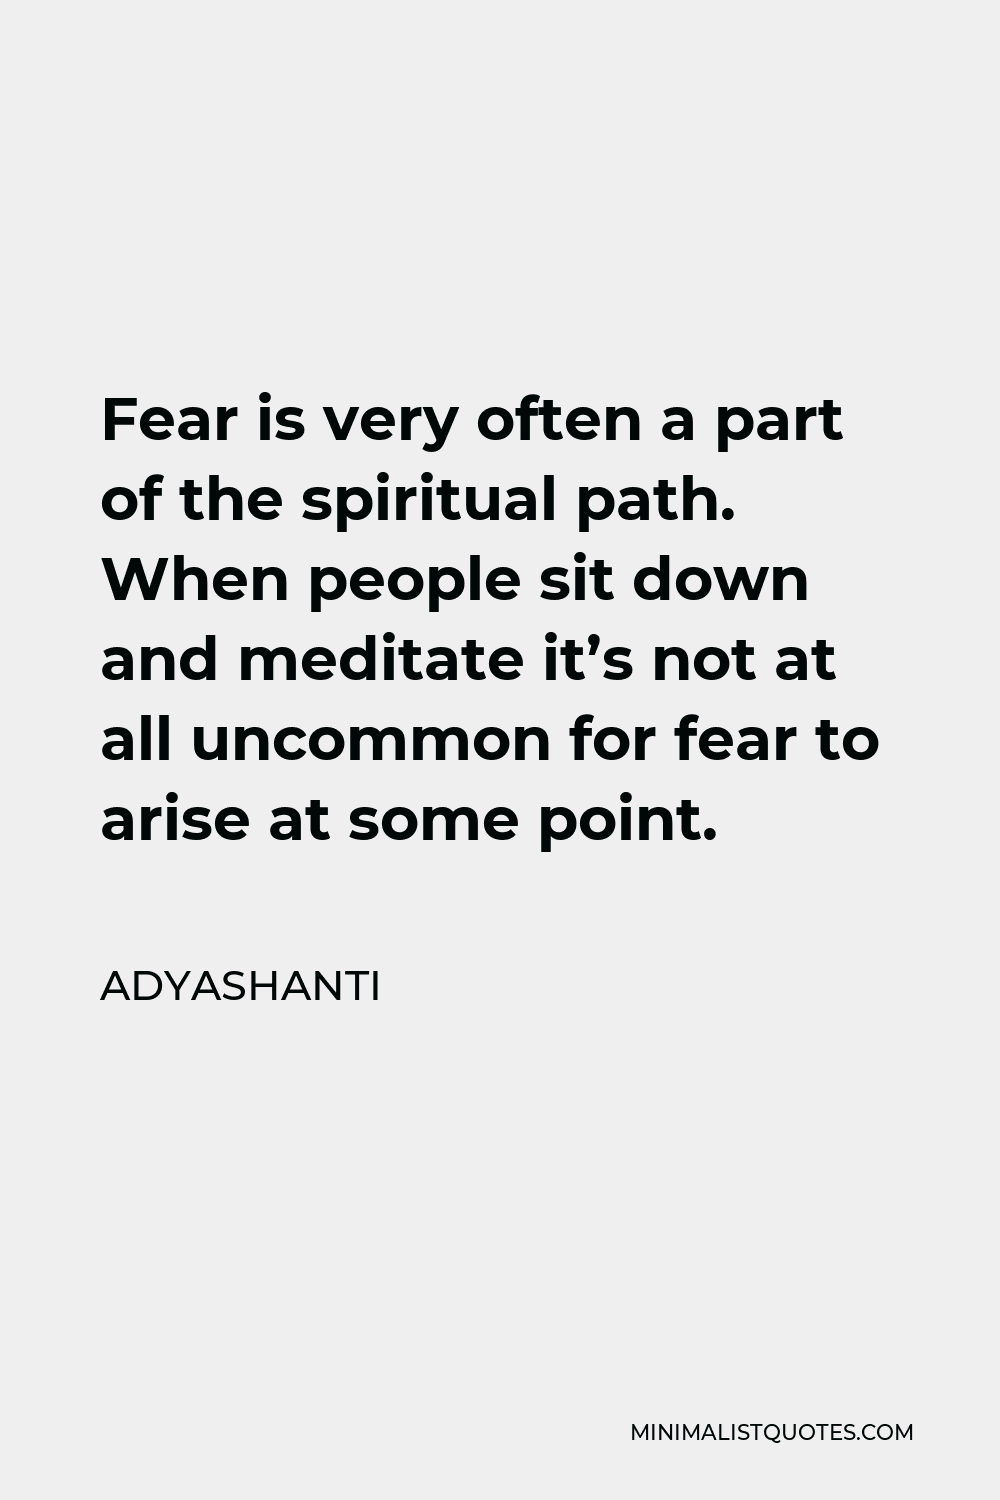 Adyashanti Quote - Fear is very often a part of the spiritual path. When people sit down and meditate it’s not at all uncommon for fear to arise at some point.